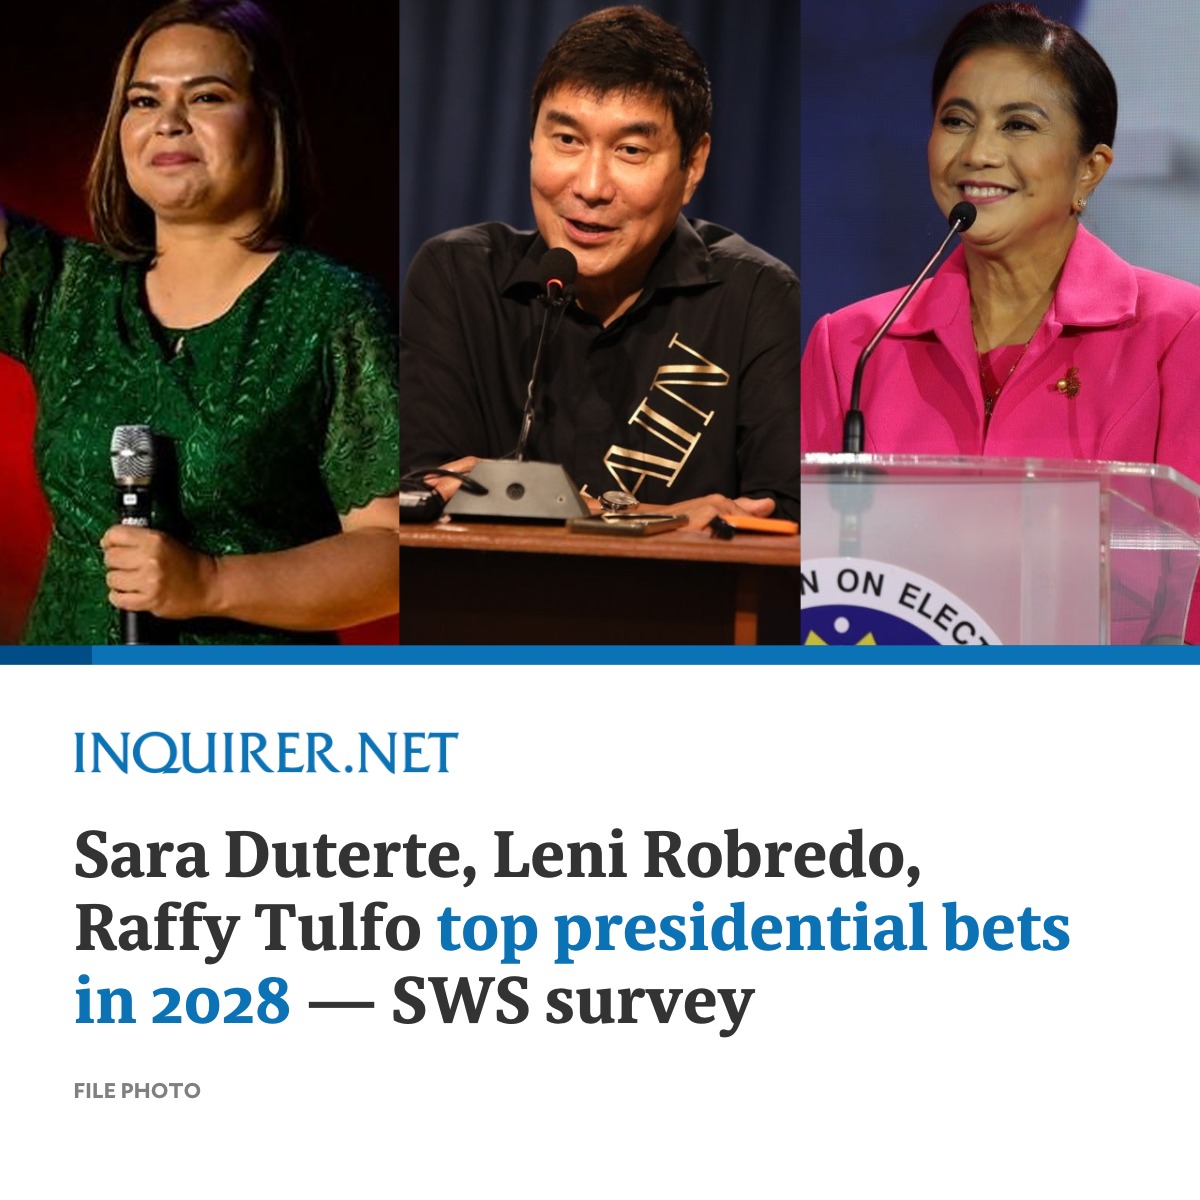 Of the 1,200 respondents polled by the SWS, 28 percent said they would vote for Duterte, 11 percent answered Tulfo, and 6 percent preferred Robredo.

READ: inq.news/SWS-presbets20…